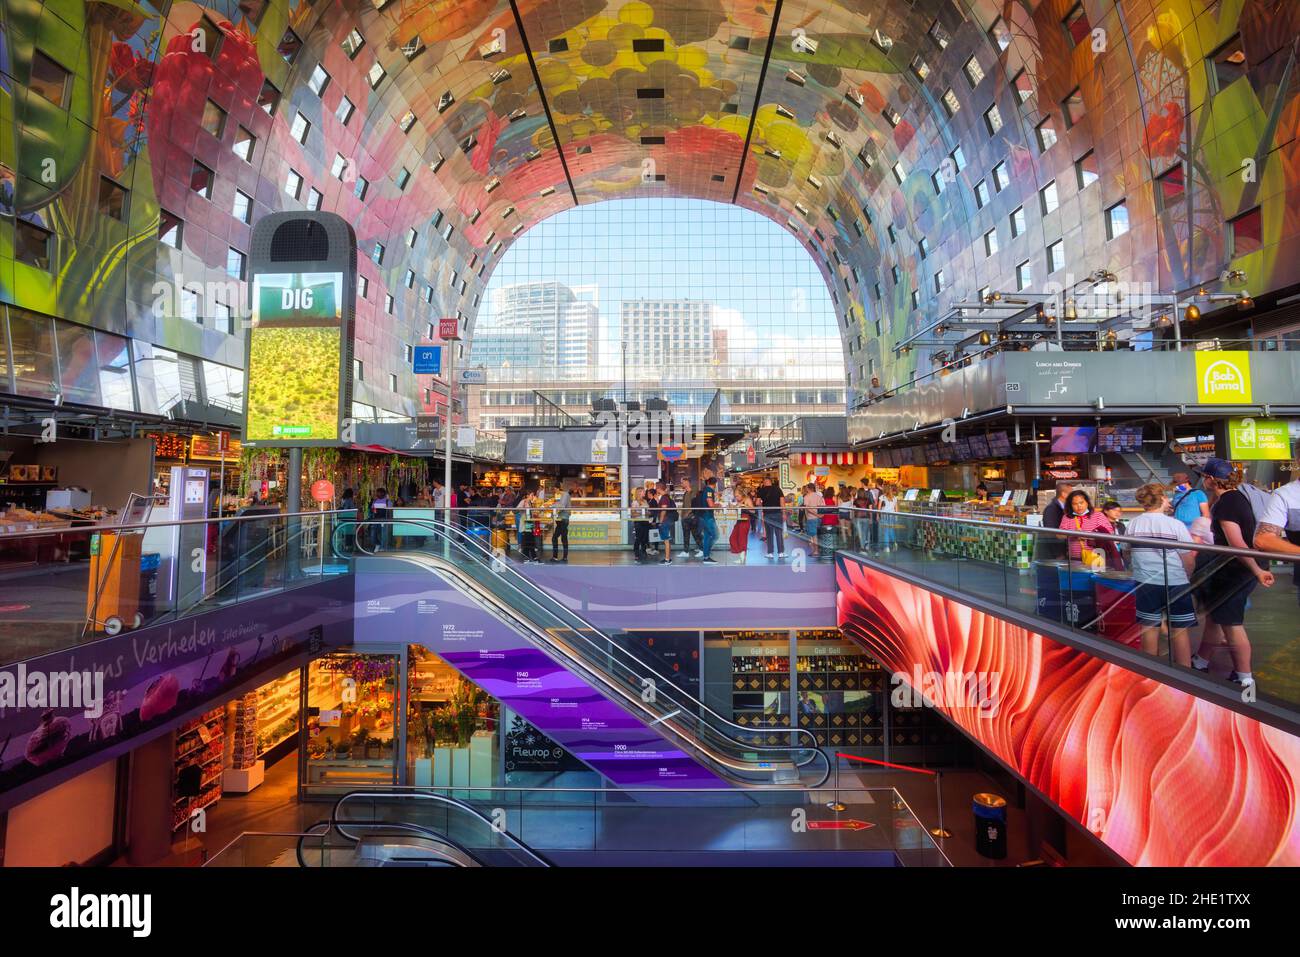 Rotterdam, Netherlands - 20 July 2020: The Markthal, a residential and office building with a market hall and food courts, is a prominent contemporary Stock Photo